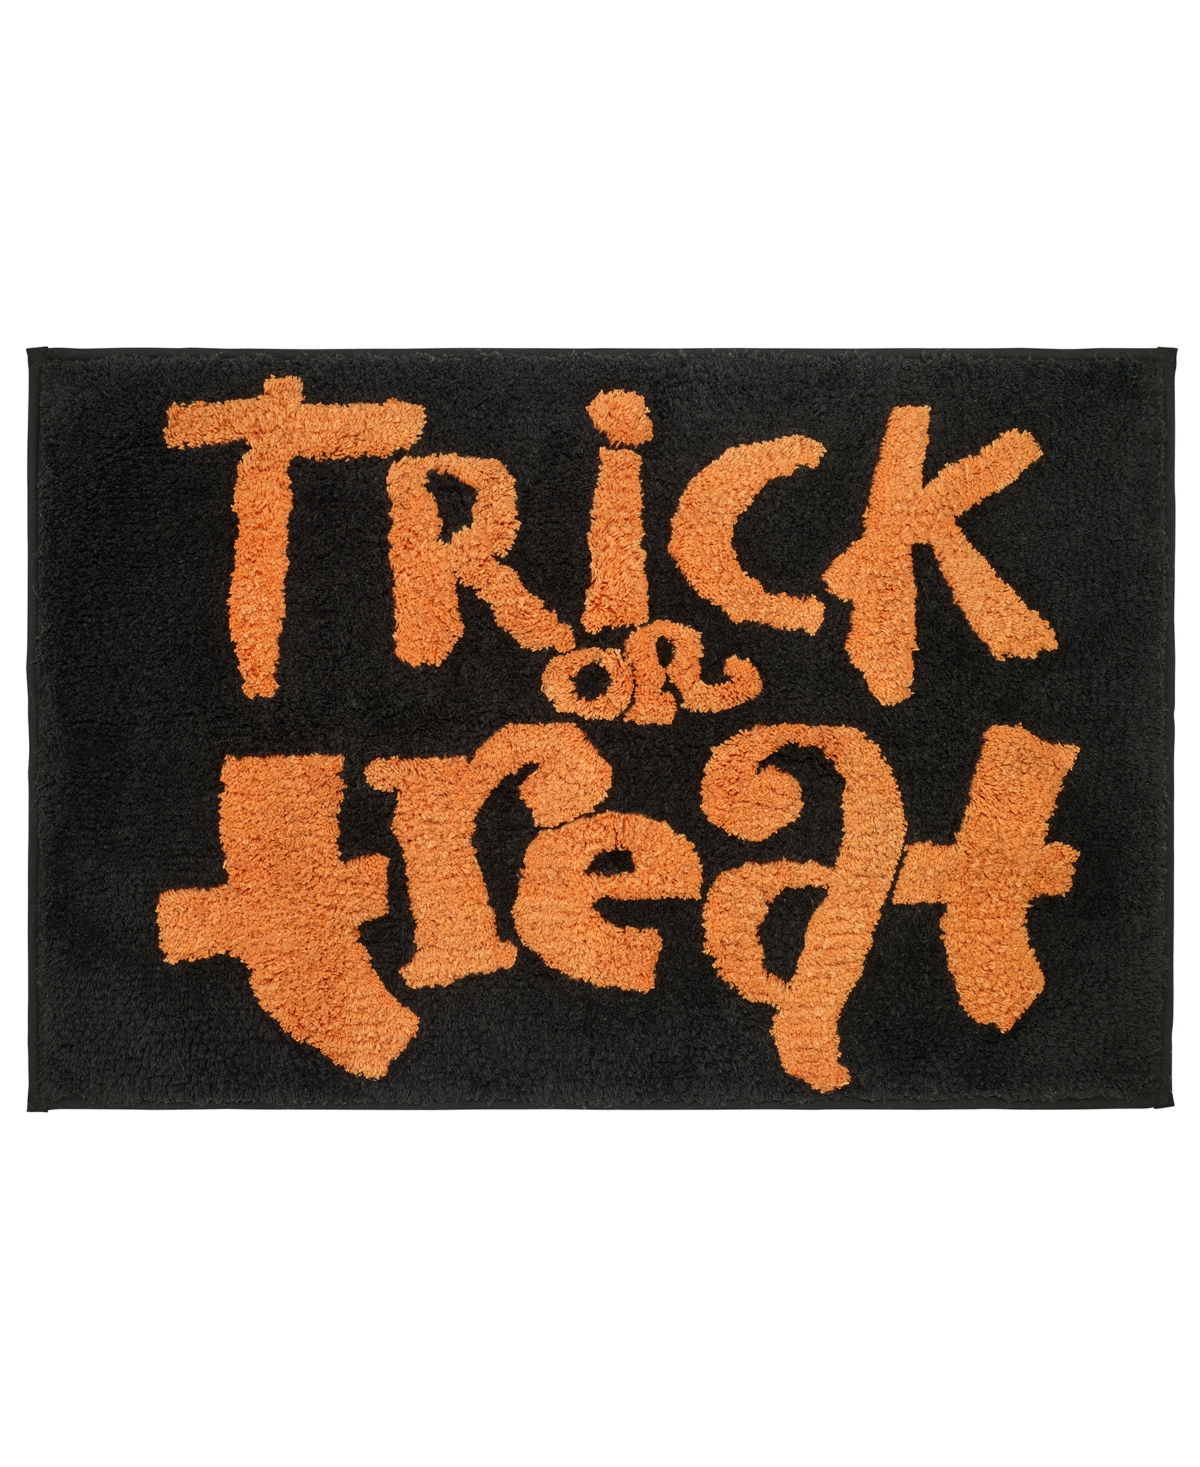 Trick or Treat Rug 32 x 20 Bedding